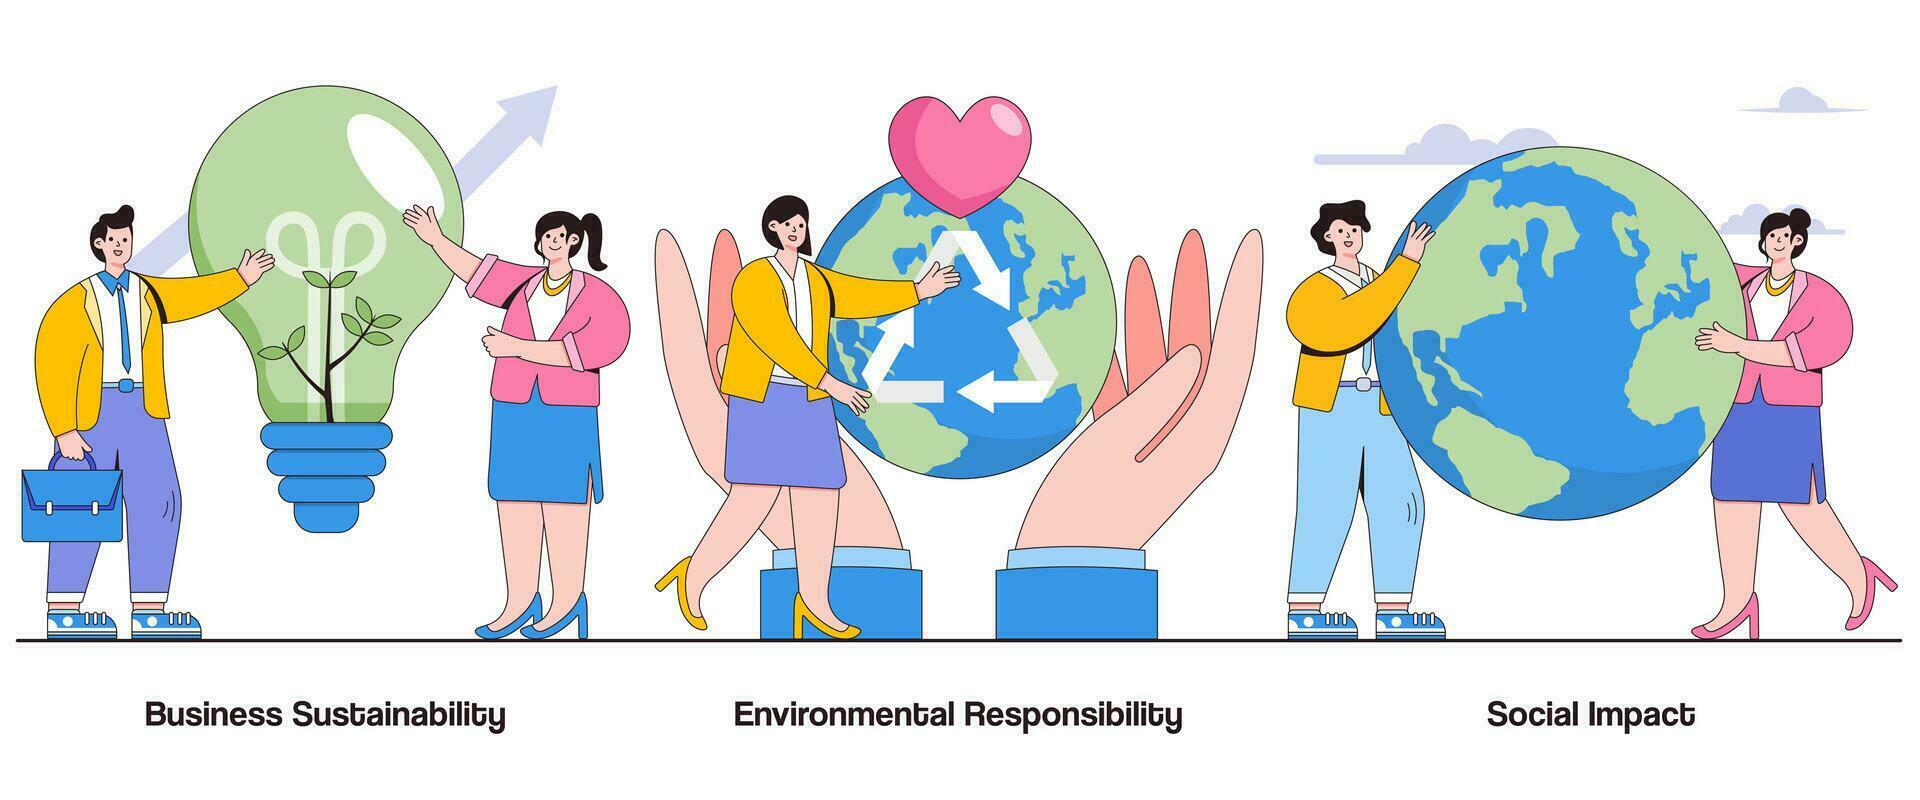 Business sustainability, environmental responsibility, social impact concept with character. Sustainable business practices abstract vector illustration set. Eco-friendly initiatives metaphor